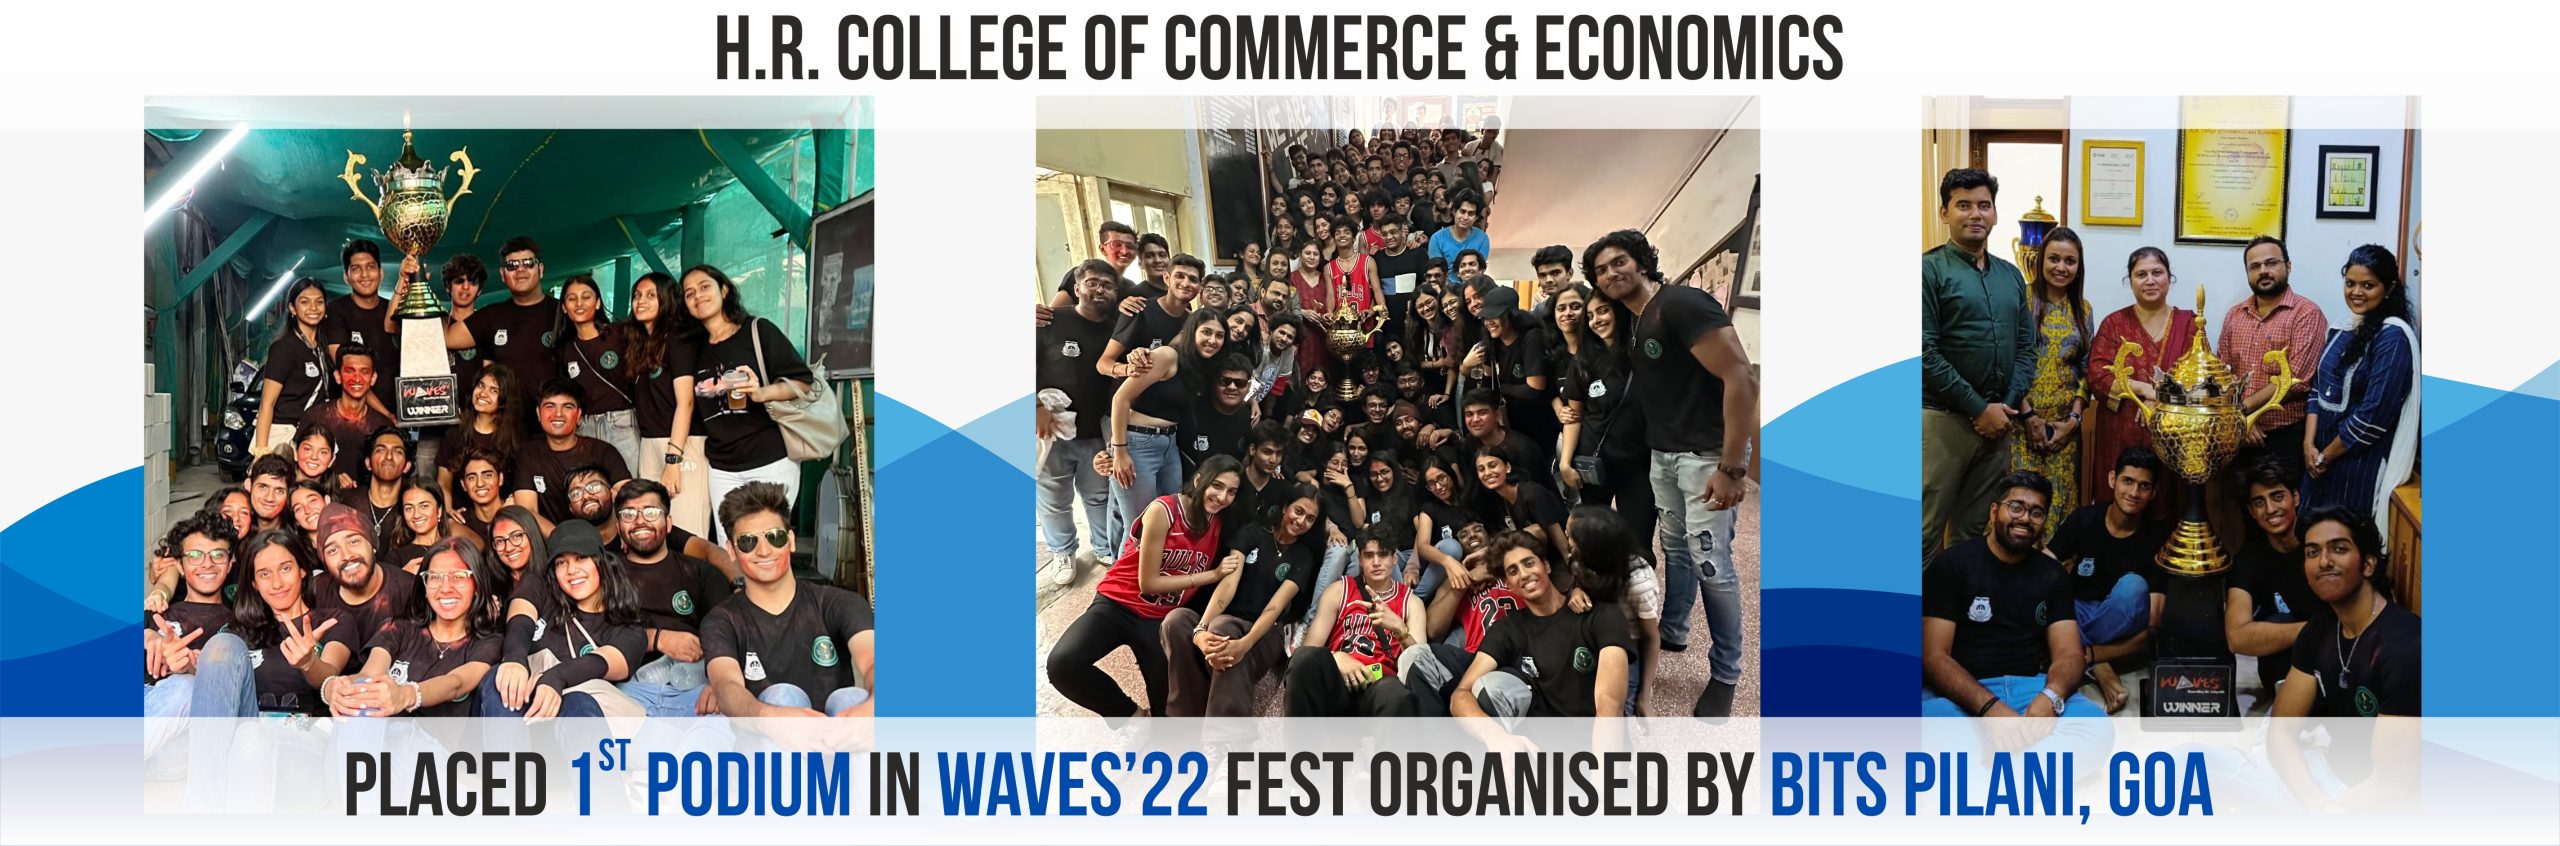 H.R. College of Commerce & Economics placed 1st podium in Waves’22 fest organised by Bits Pilani, Goa - new